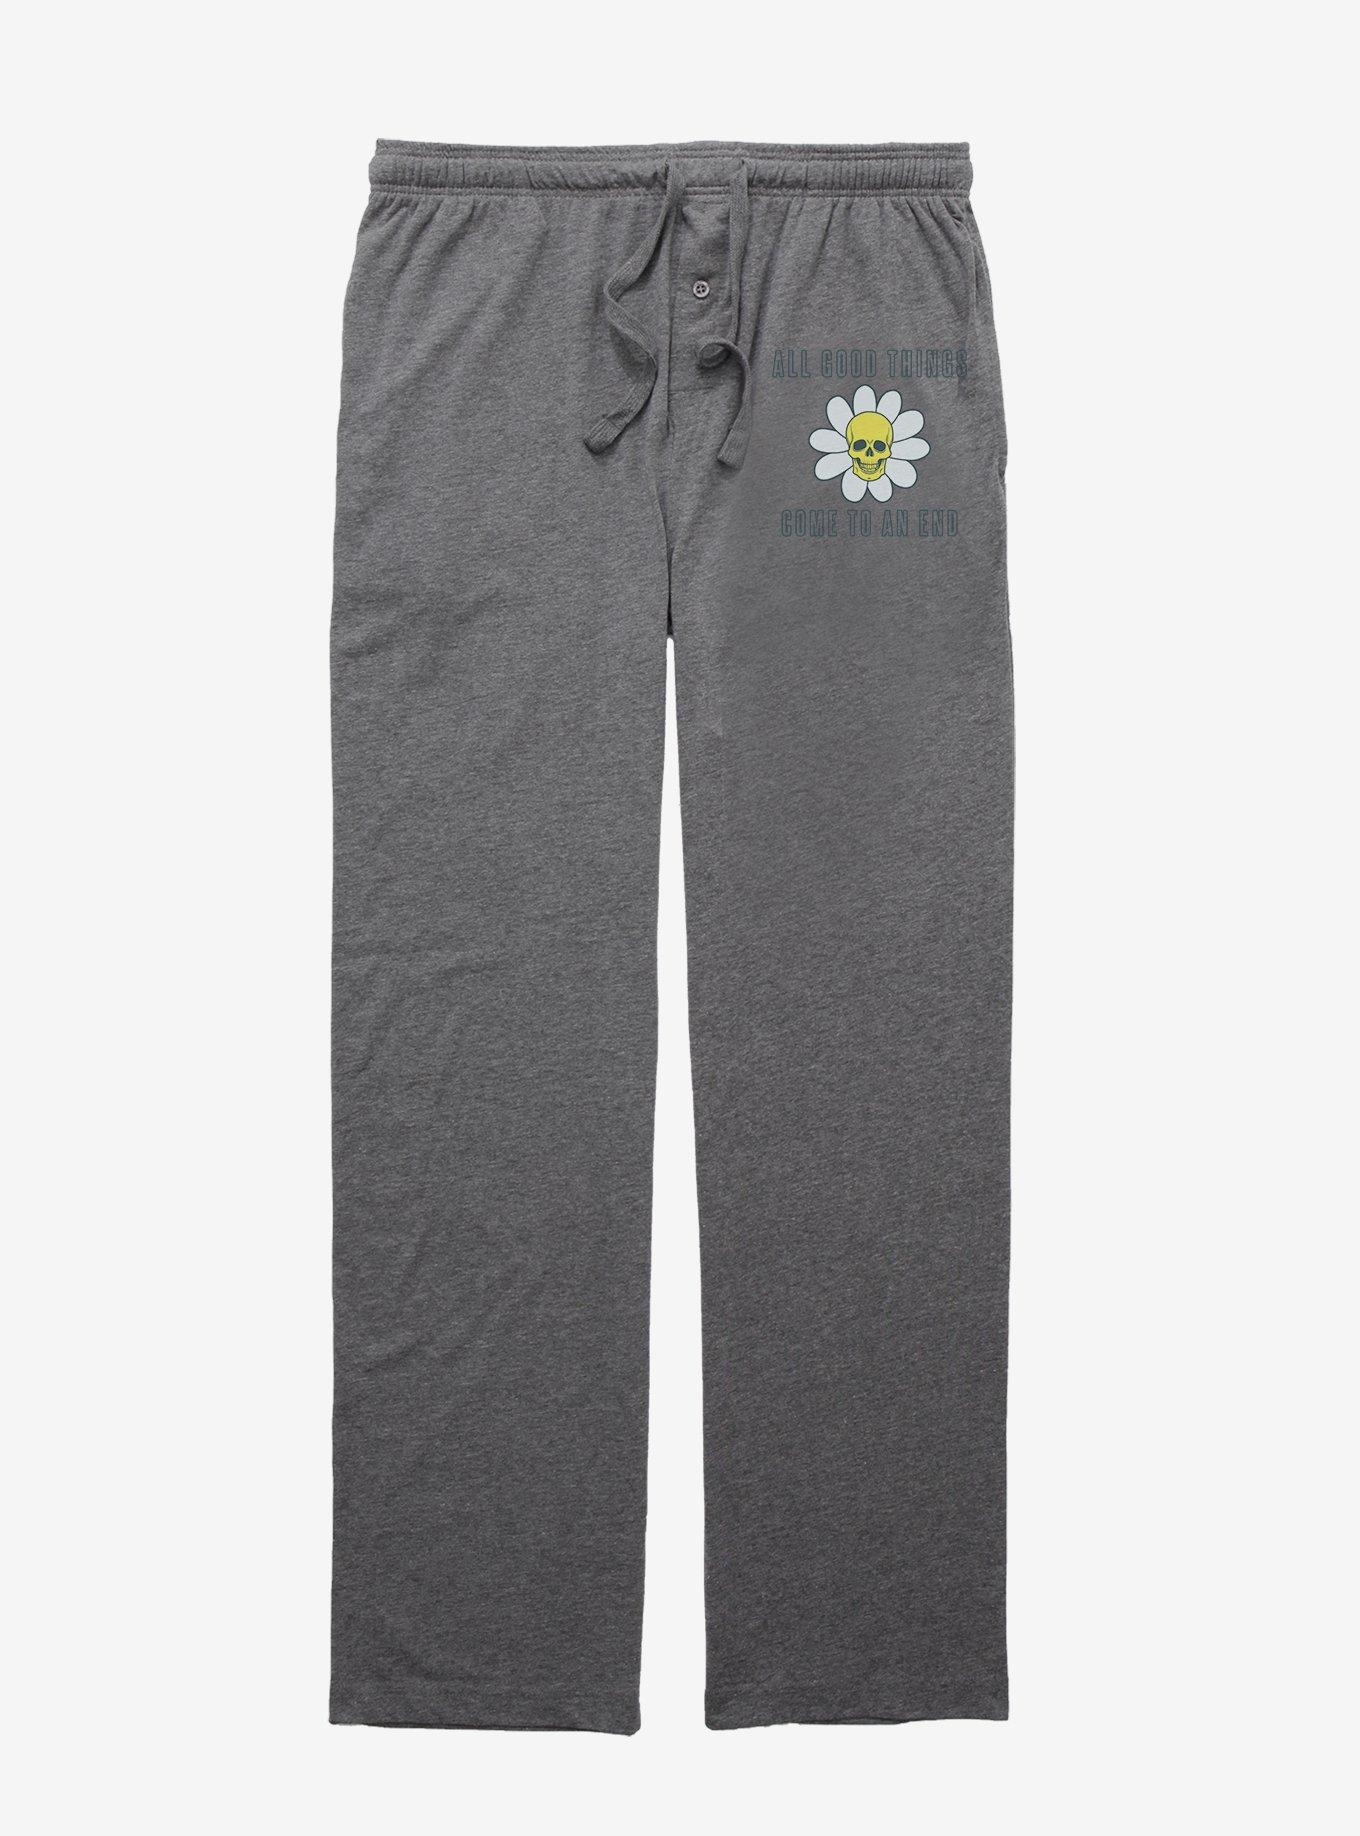 Cozy Collection Good Things Come To An End Pajama Pants, GRAPHITE HEATHER, hi-res